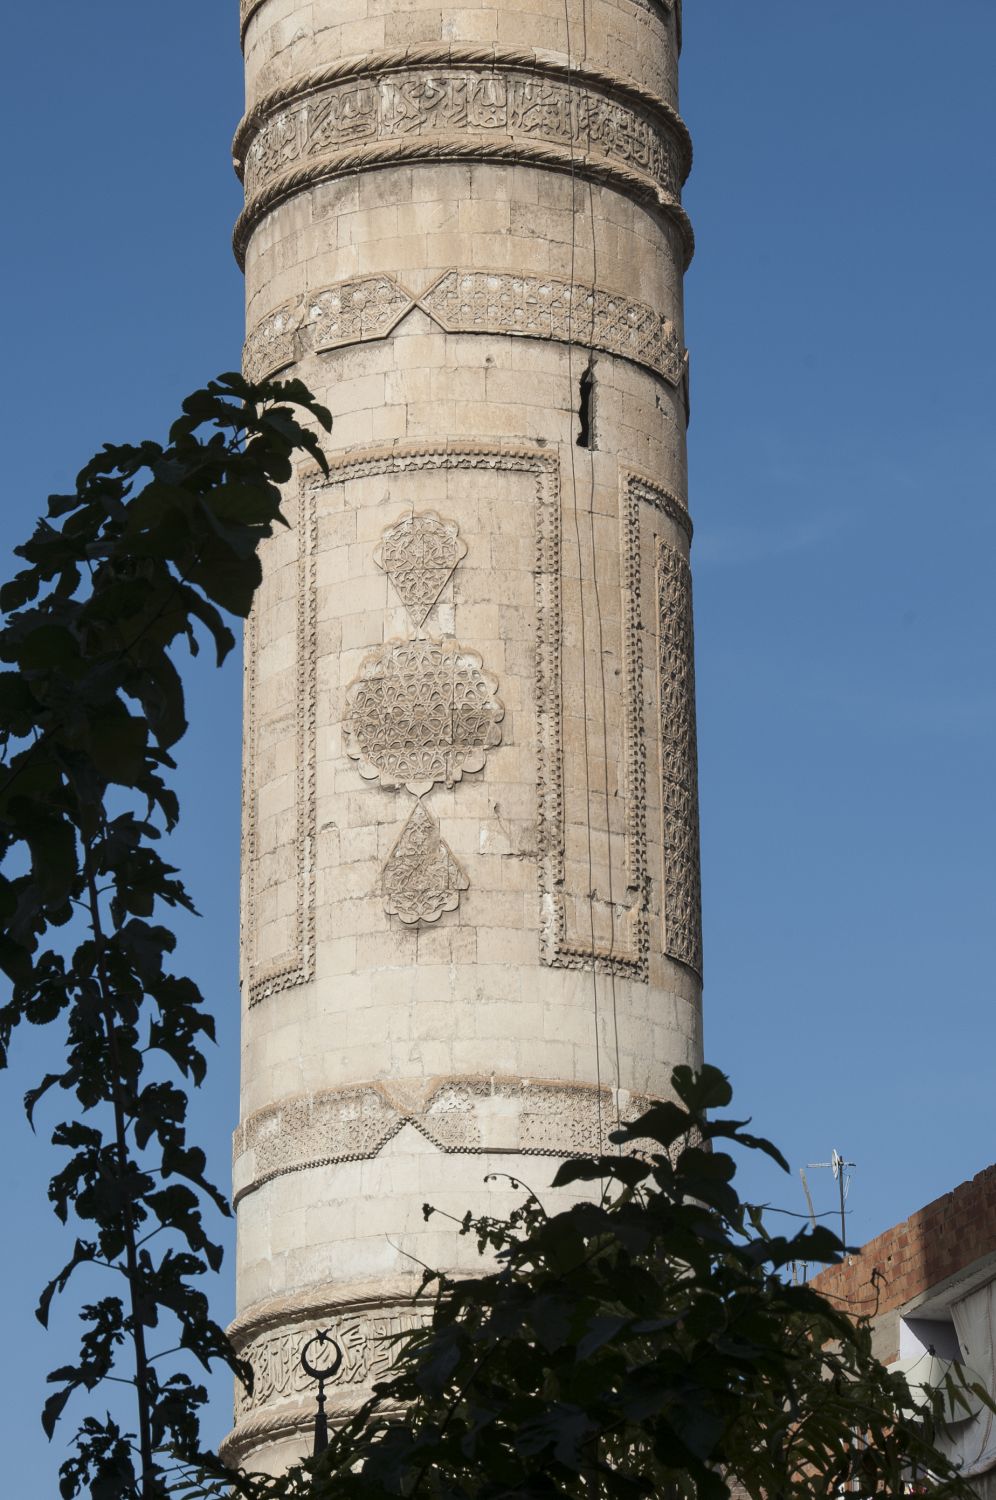 Detail view of minaret shaft showing carved ornament.